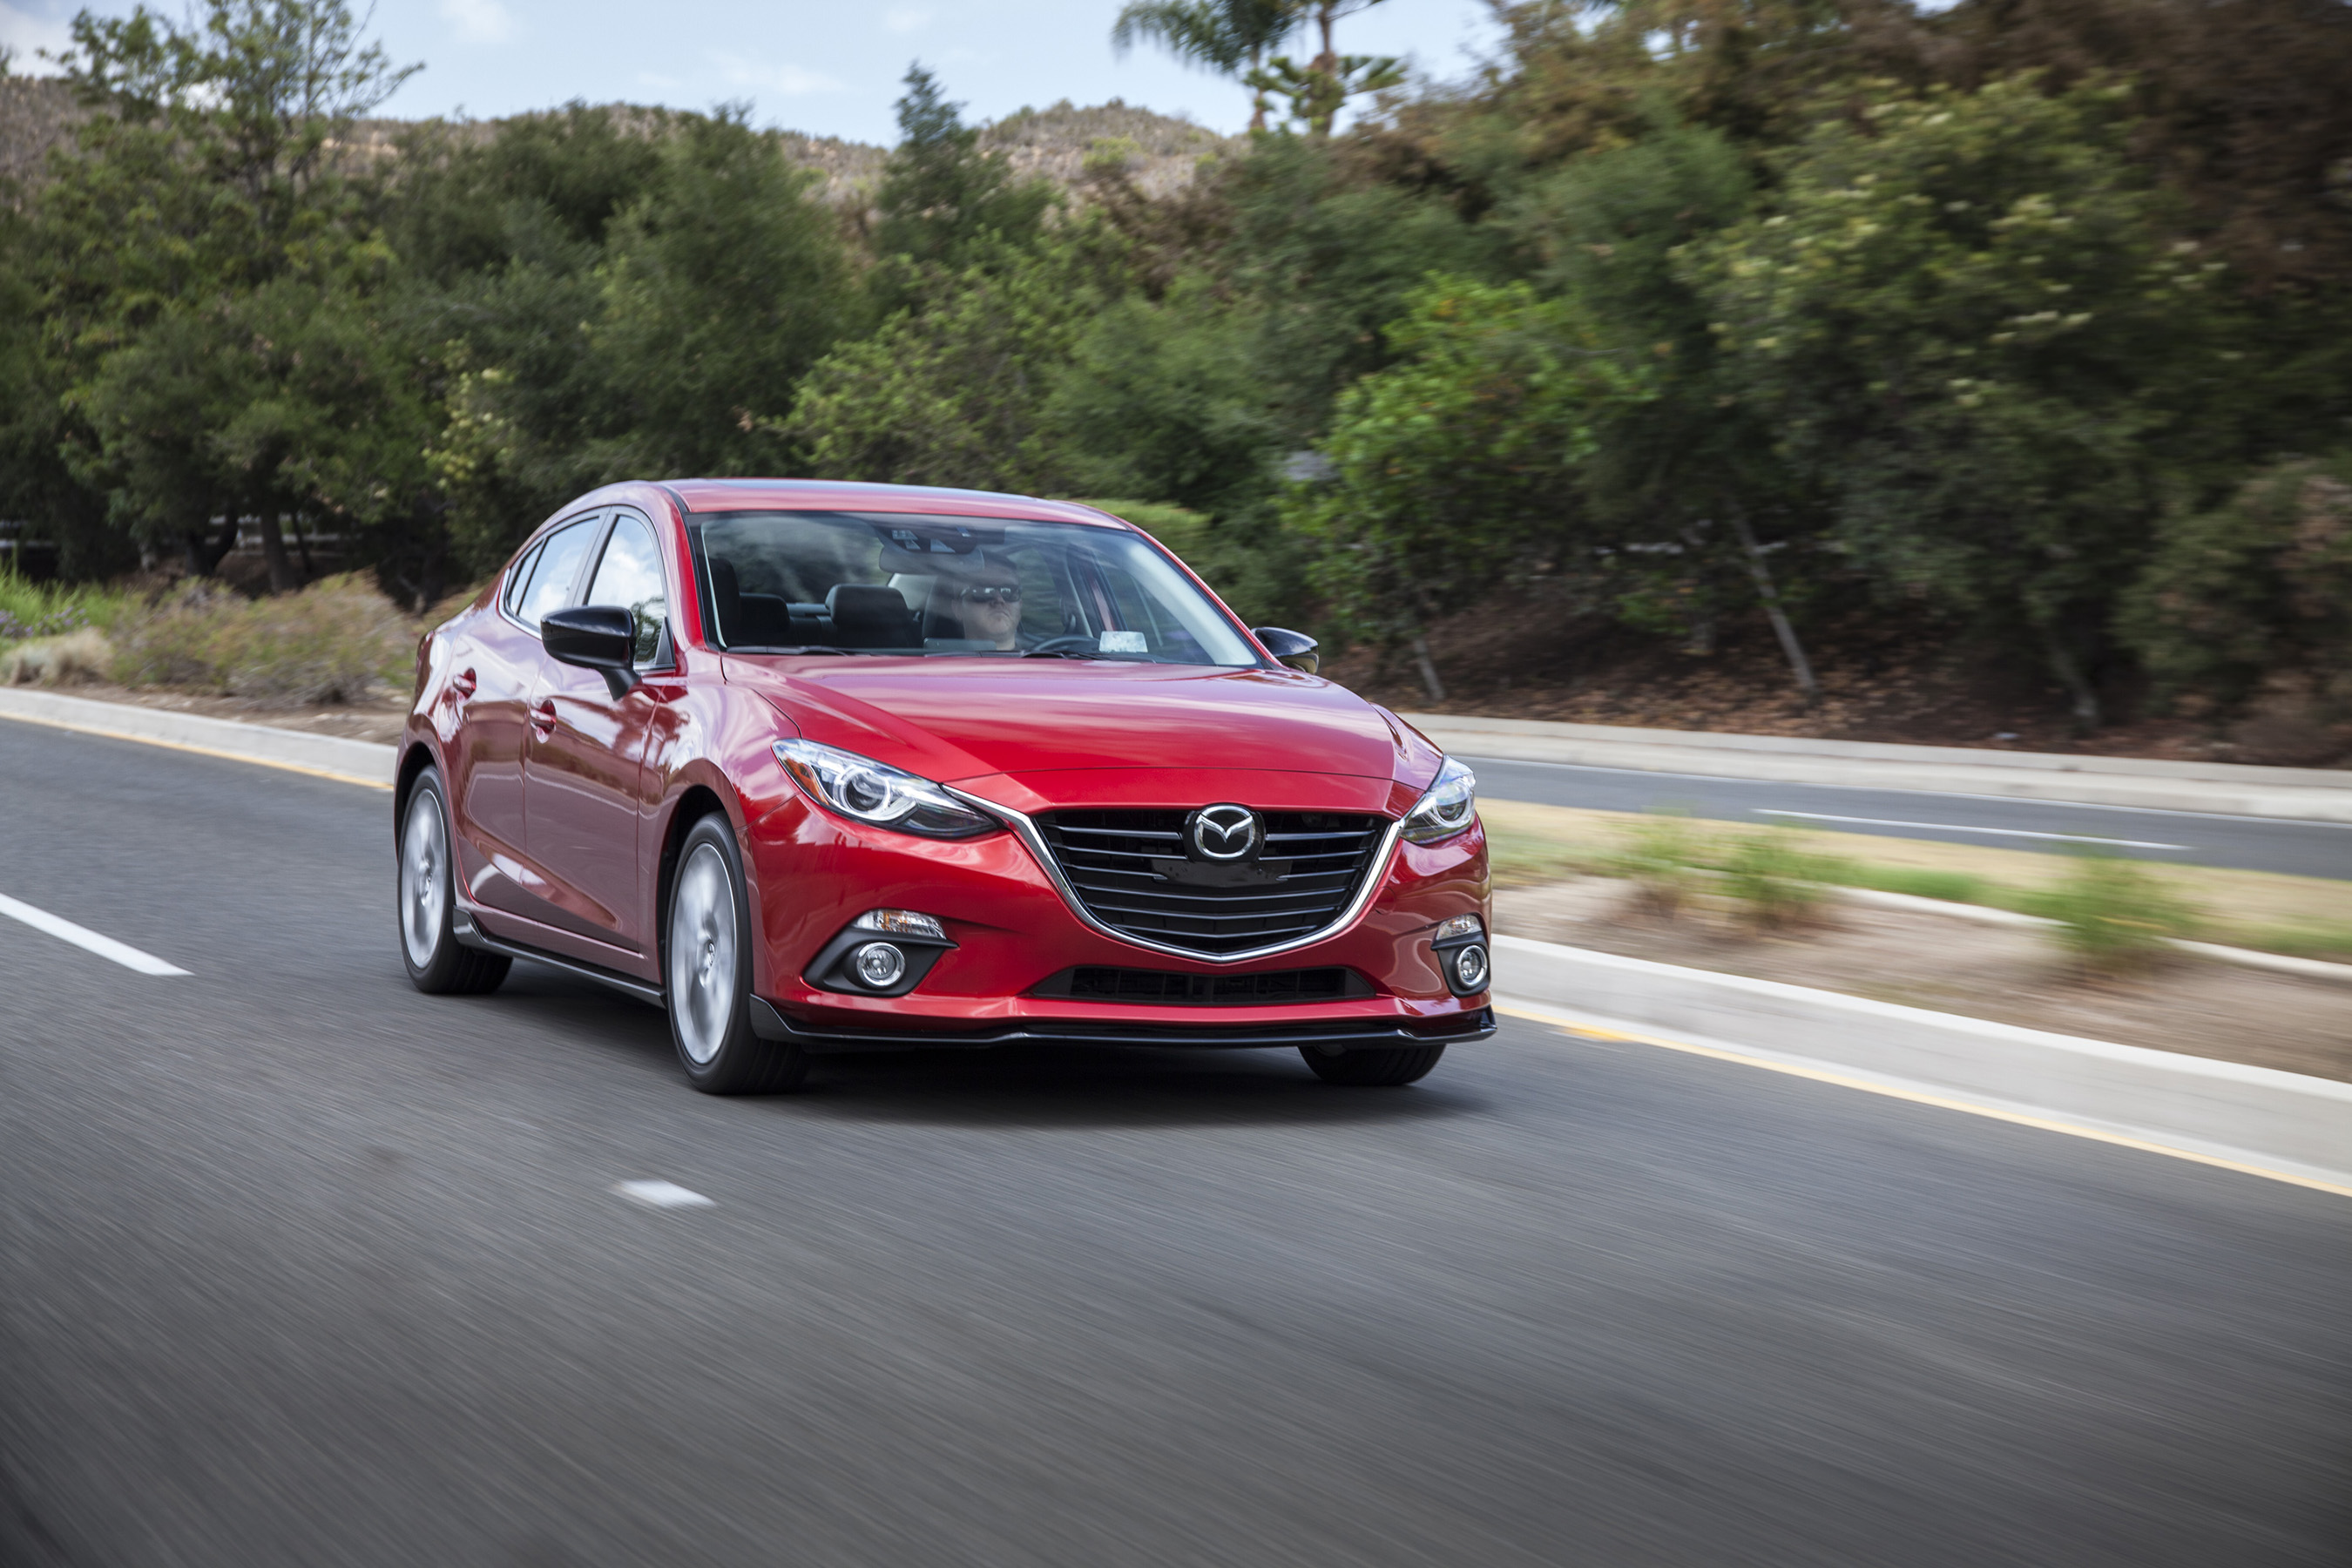 KBB.com 10 Coolest Cars: Gorgeous and sporty outside, as well as inside, the Mazda3 has been named one of our 10 Coolest Cars Under $18,000 every year of its existence.